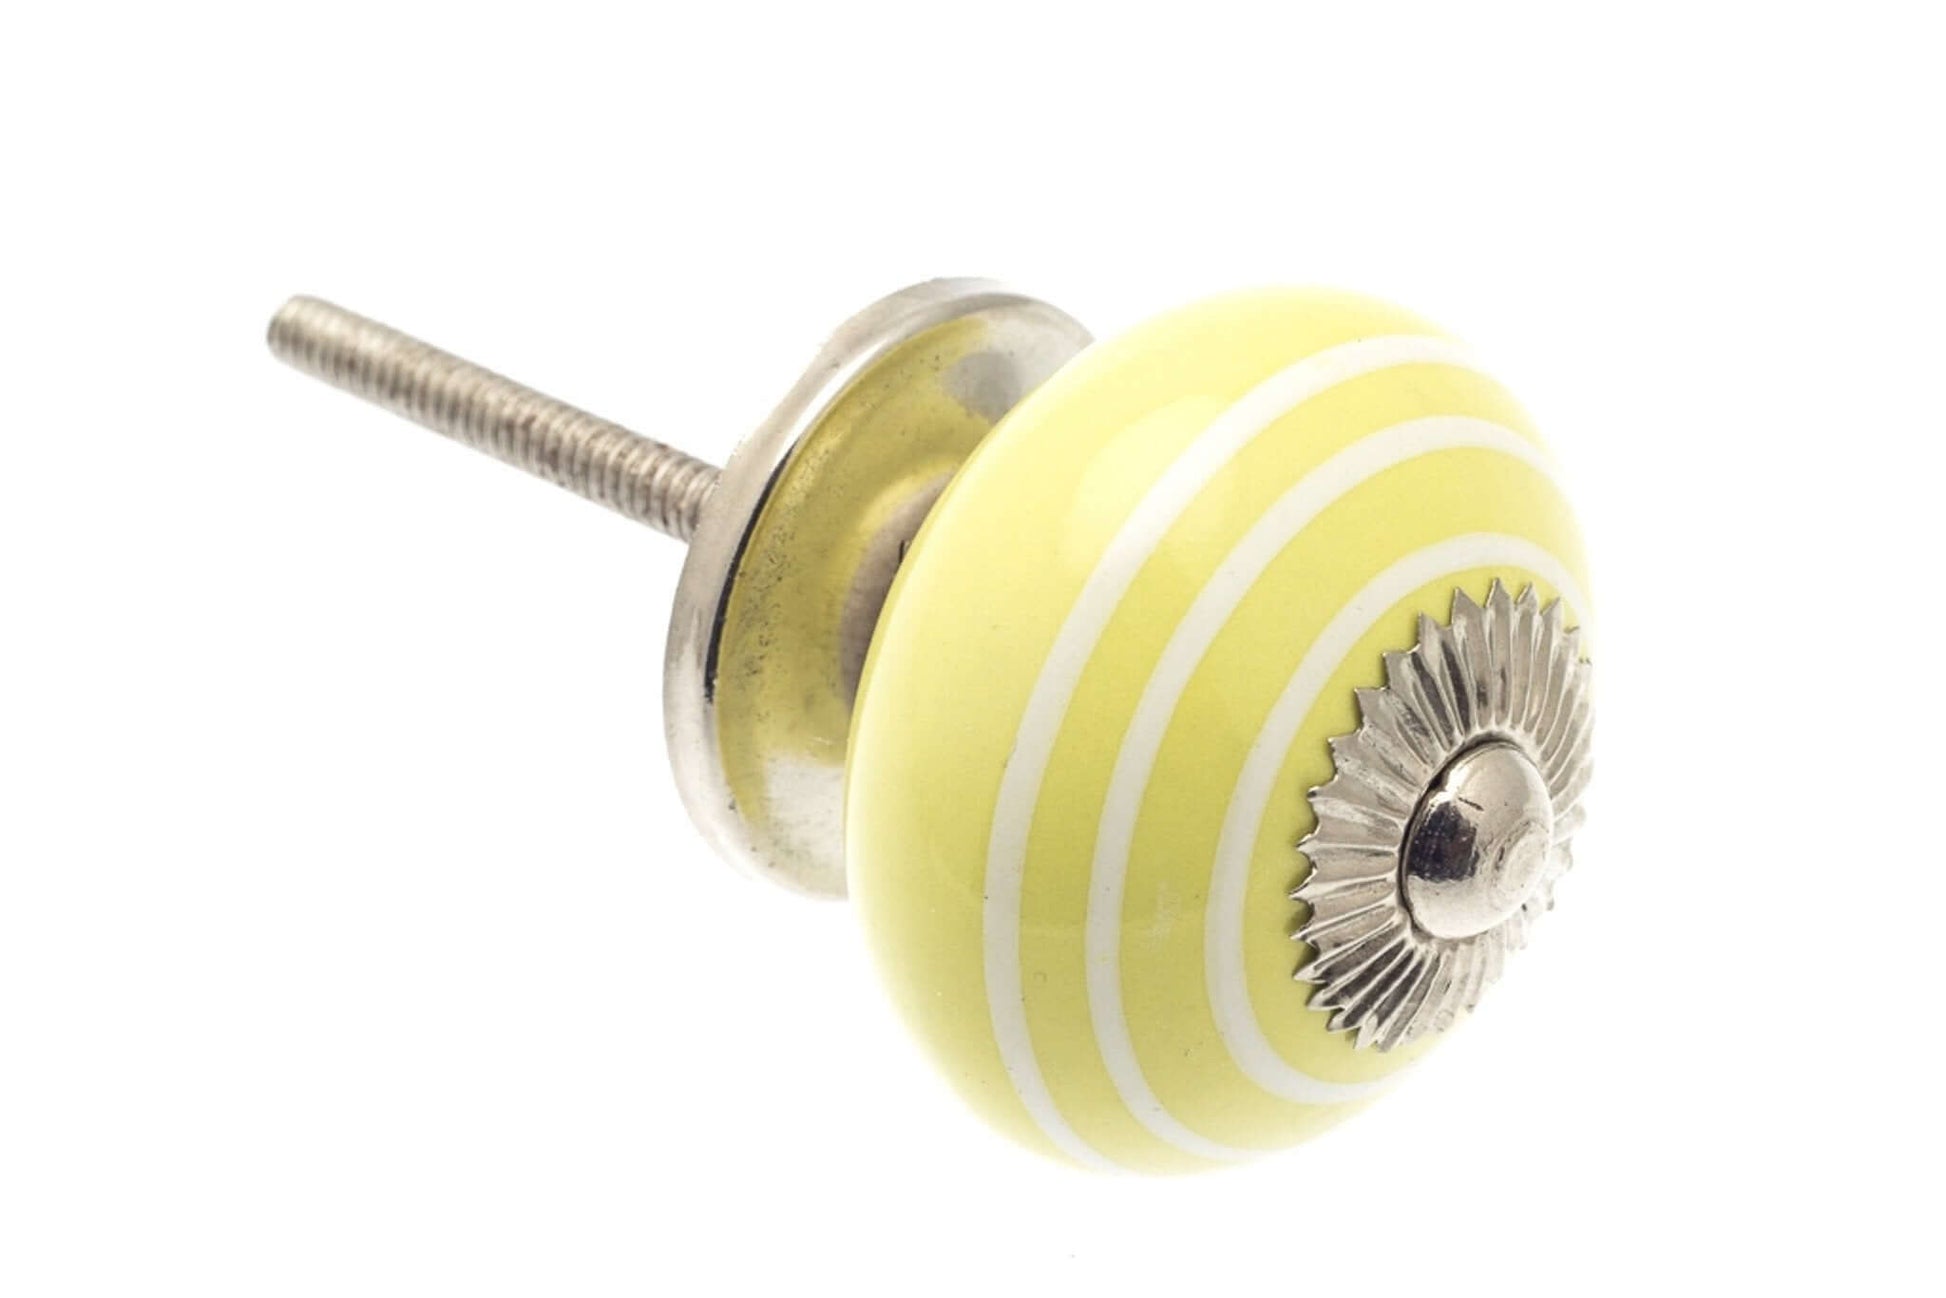 Ceramic Cupboard Knobs - Round Ceramic Knob Yellow With White Stripes / Hoops 40mm (MT-342)